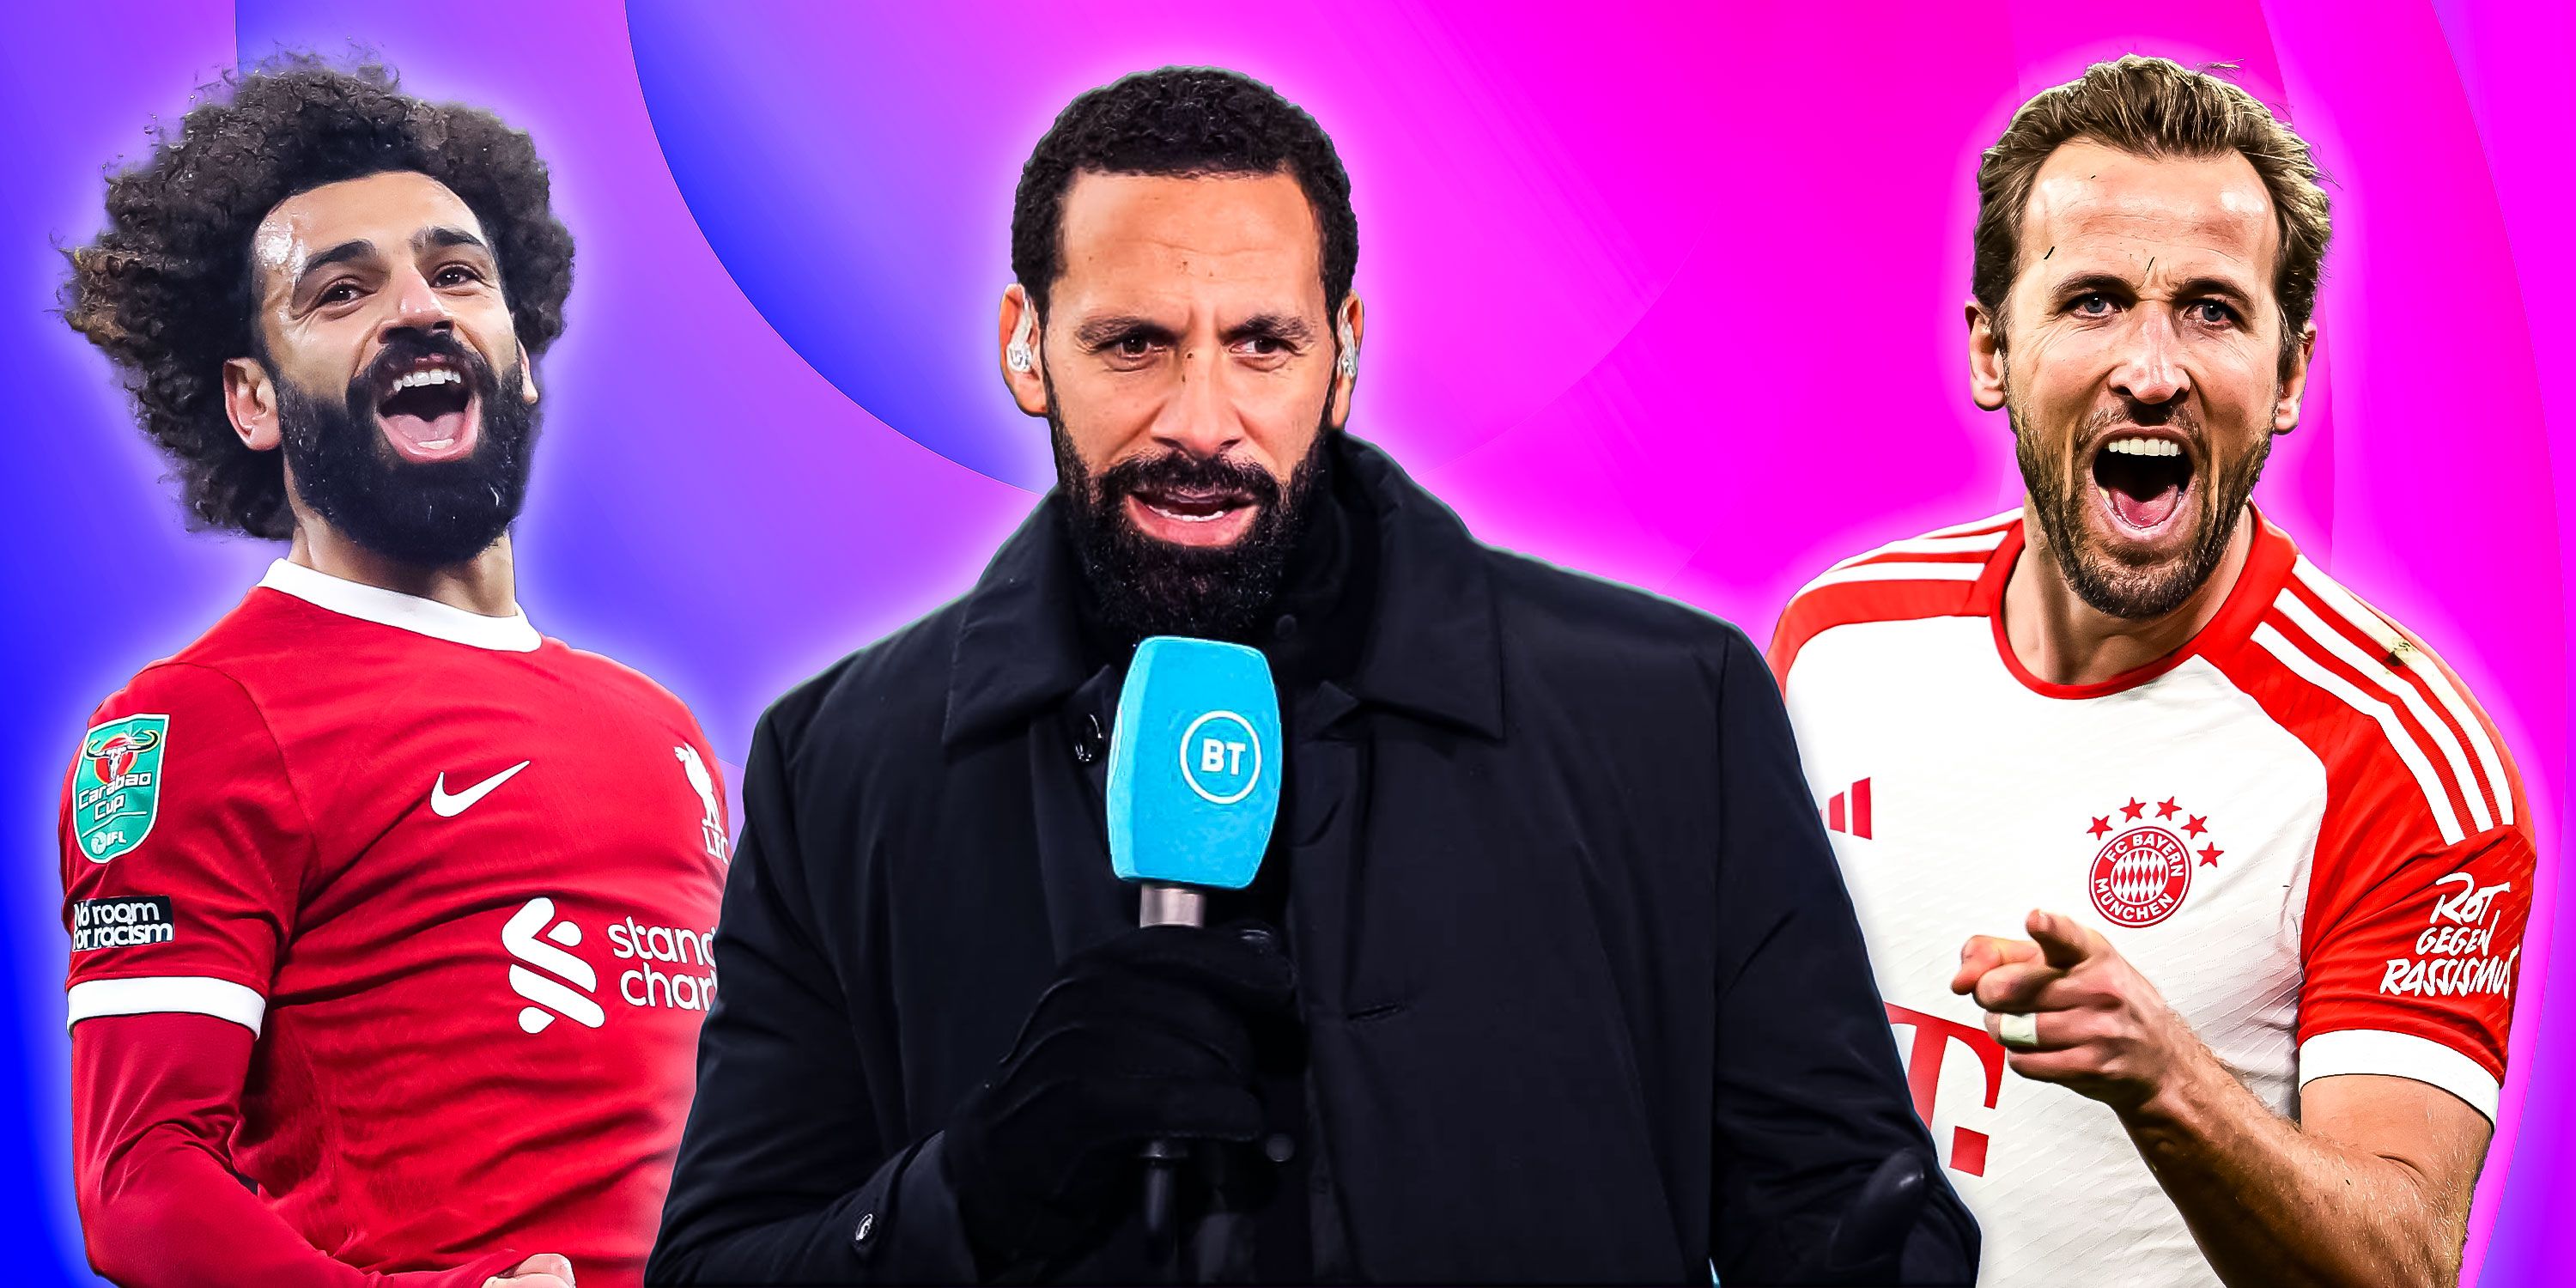 Rio Ferdinand as a pundit with Harry Kane and Mohamed Salah celebrating